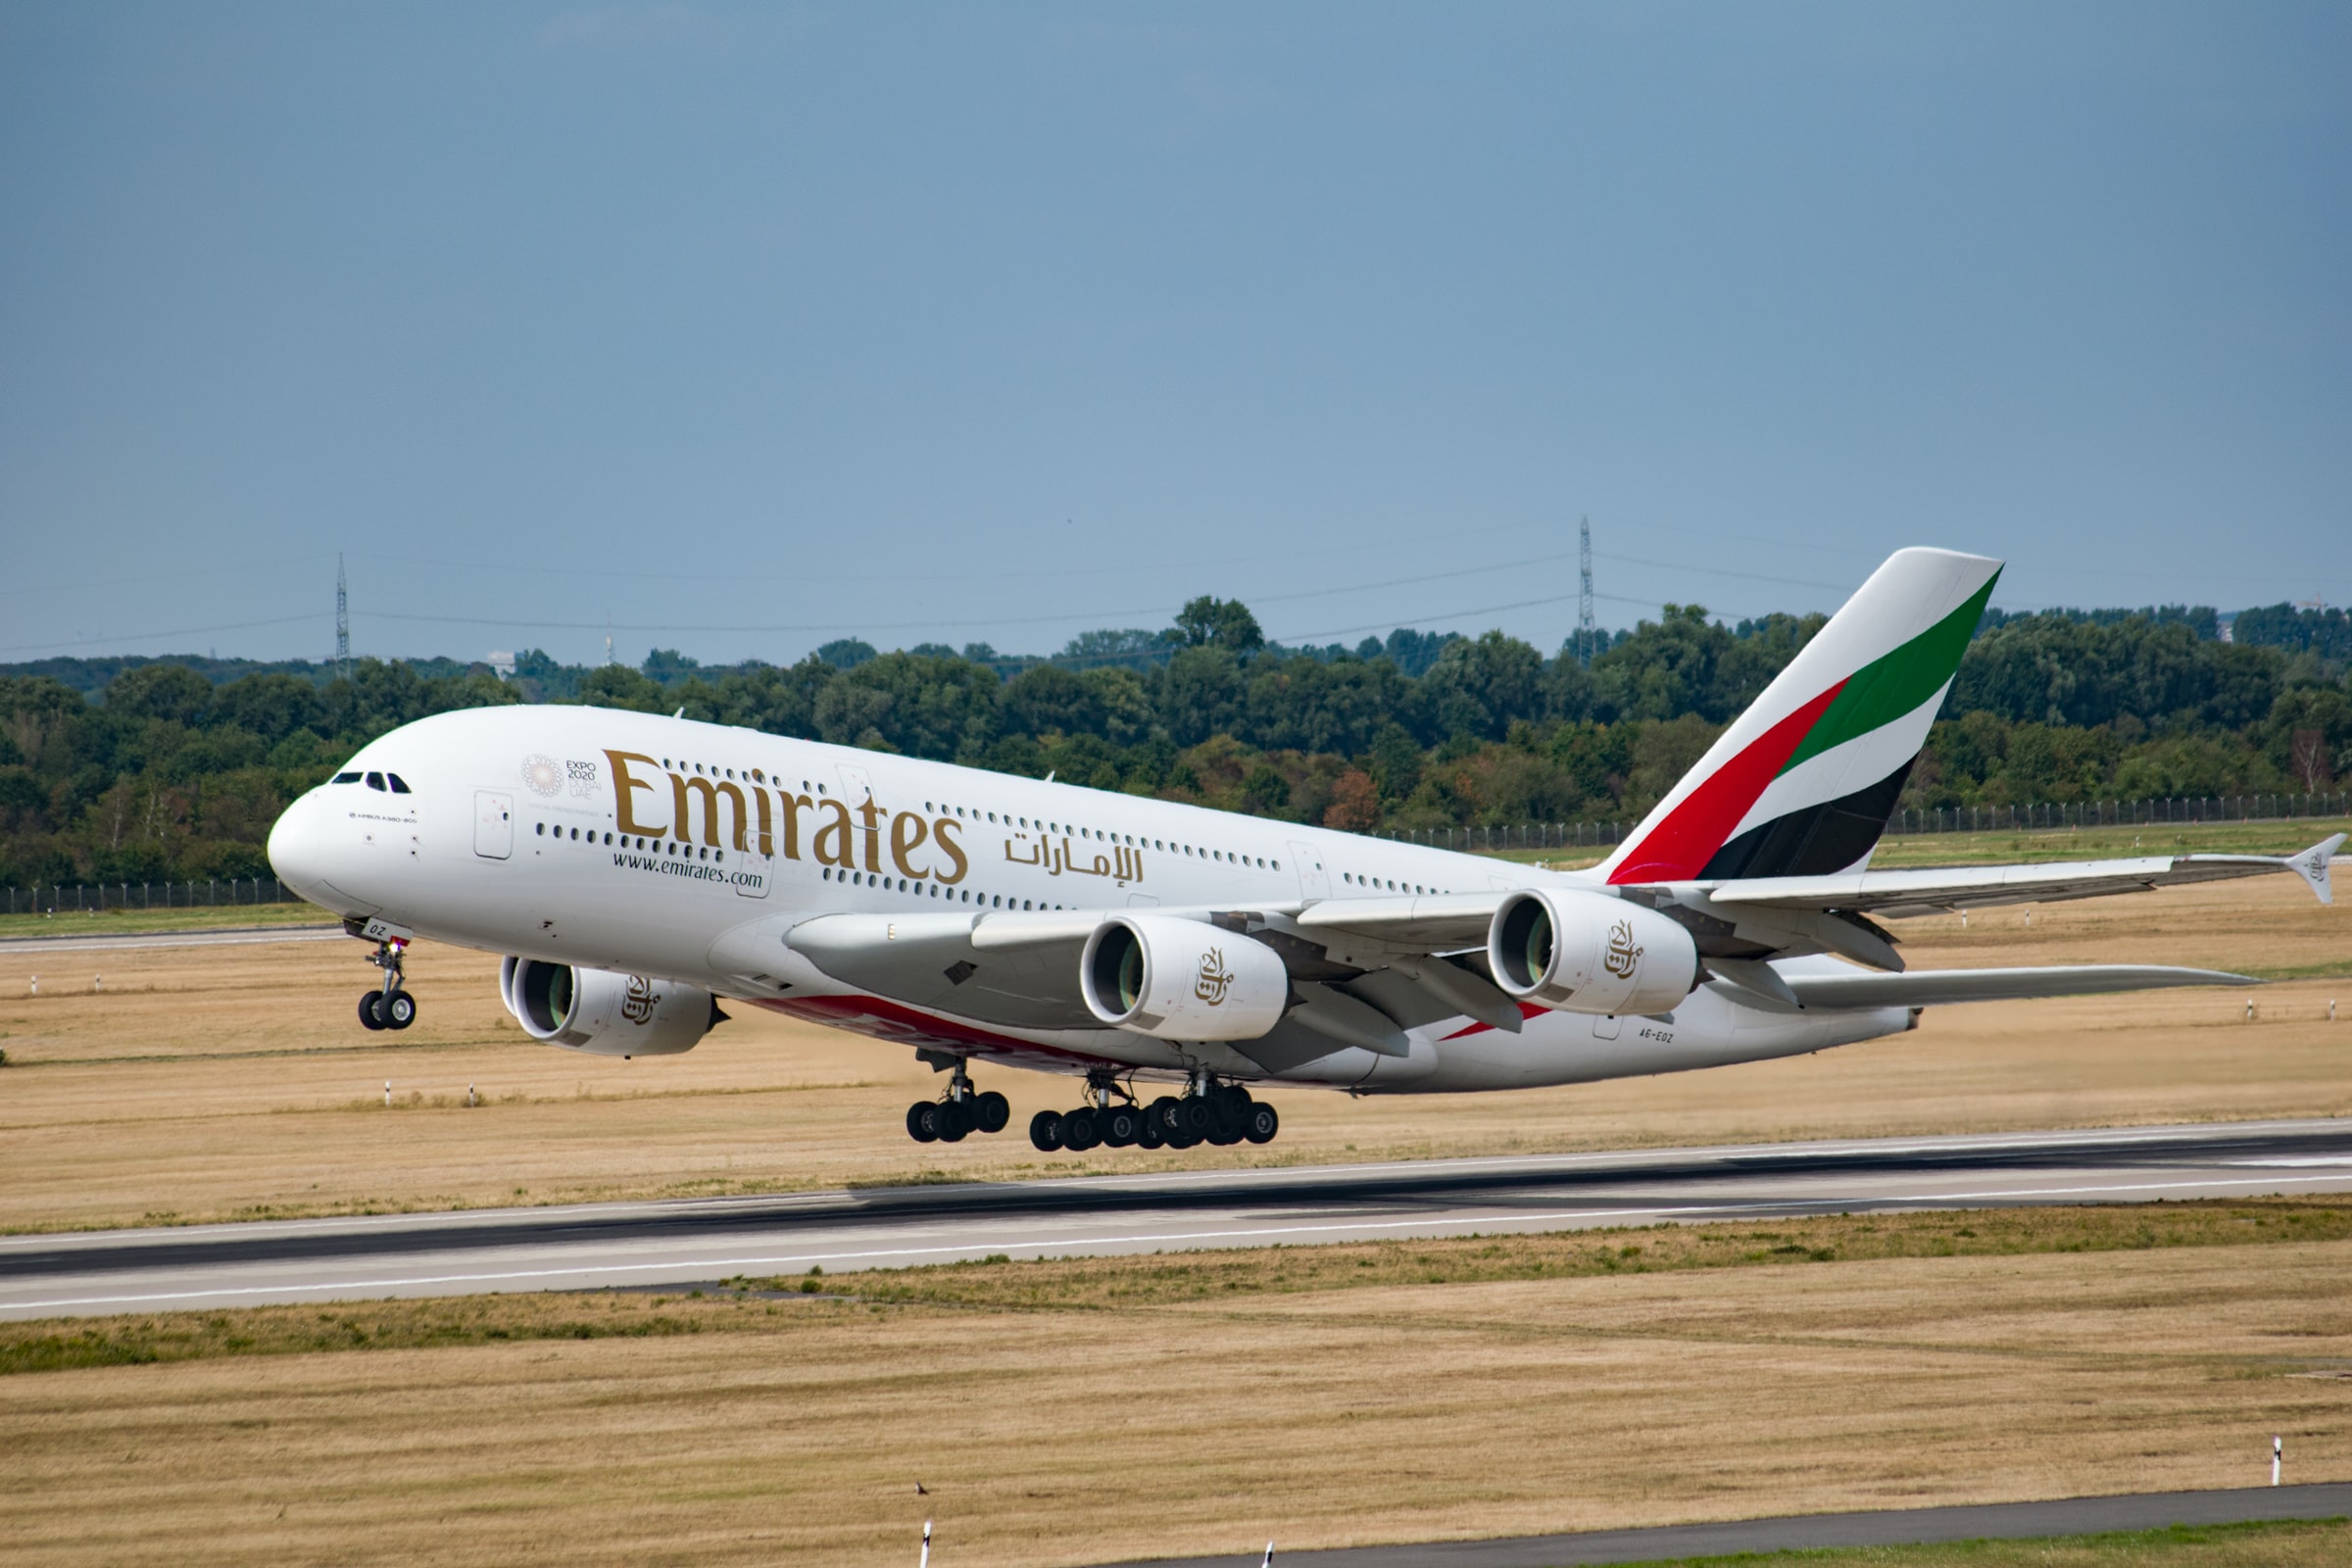 Emirates accepted the advance payment for group tickets issuance